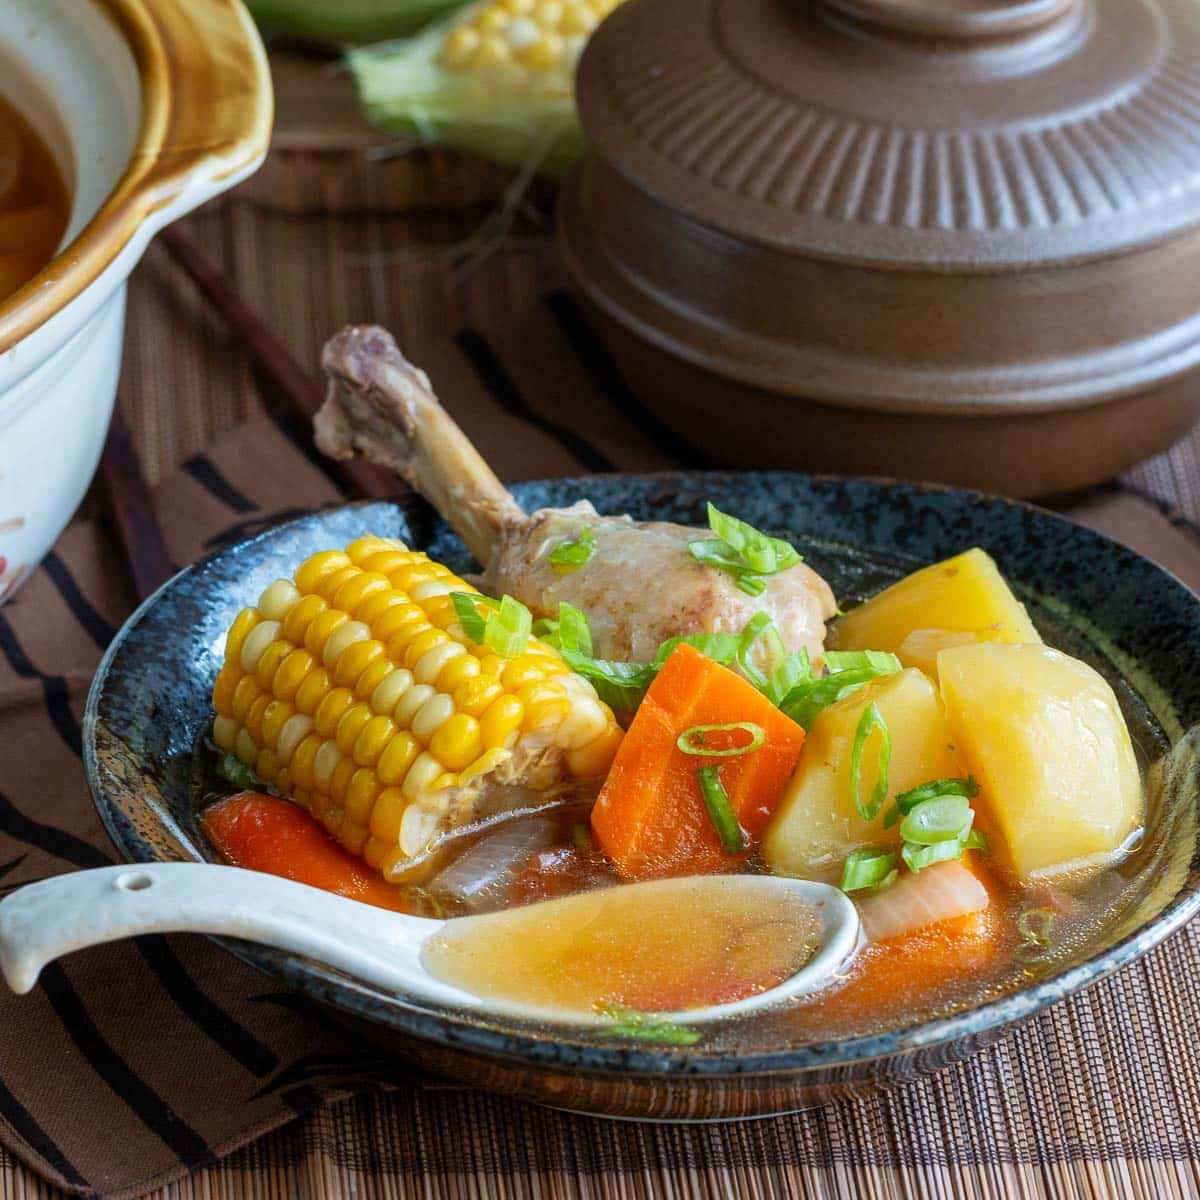 A bowl of prepared Cantonese ABC soup next to the Instant pot showing the clear broth in a spoon with vegetables and tender chicken.